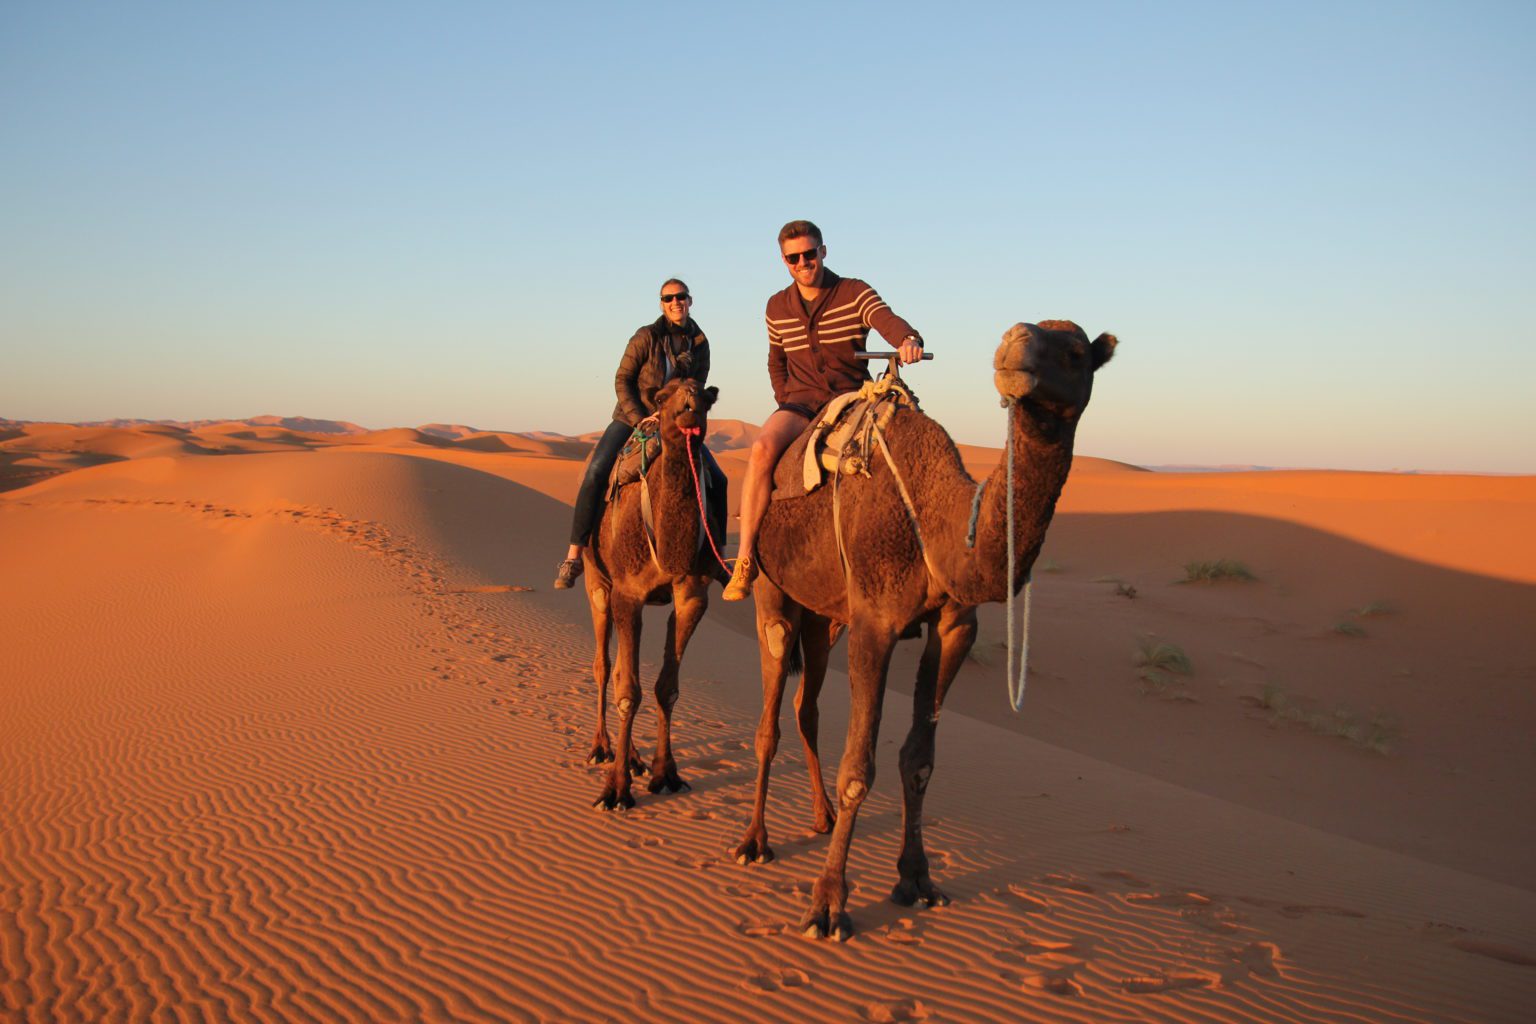 two people riding camels in red desert sand on safari in Morocco